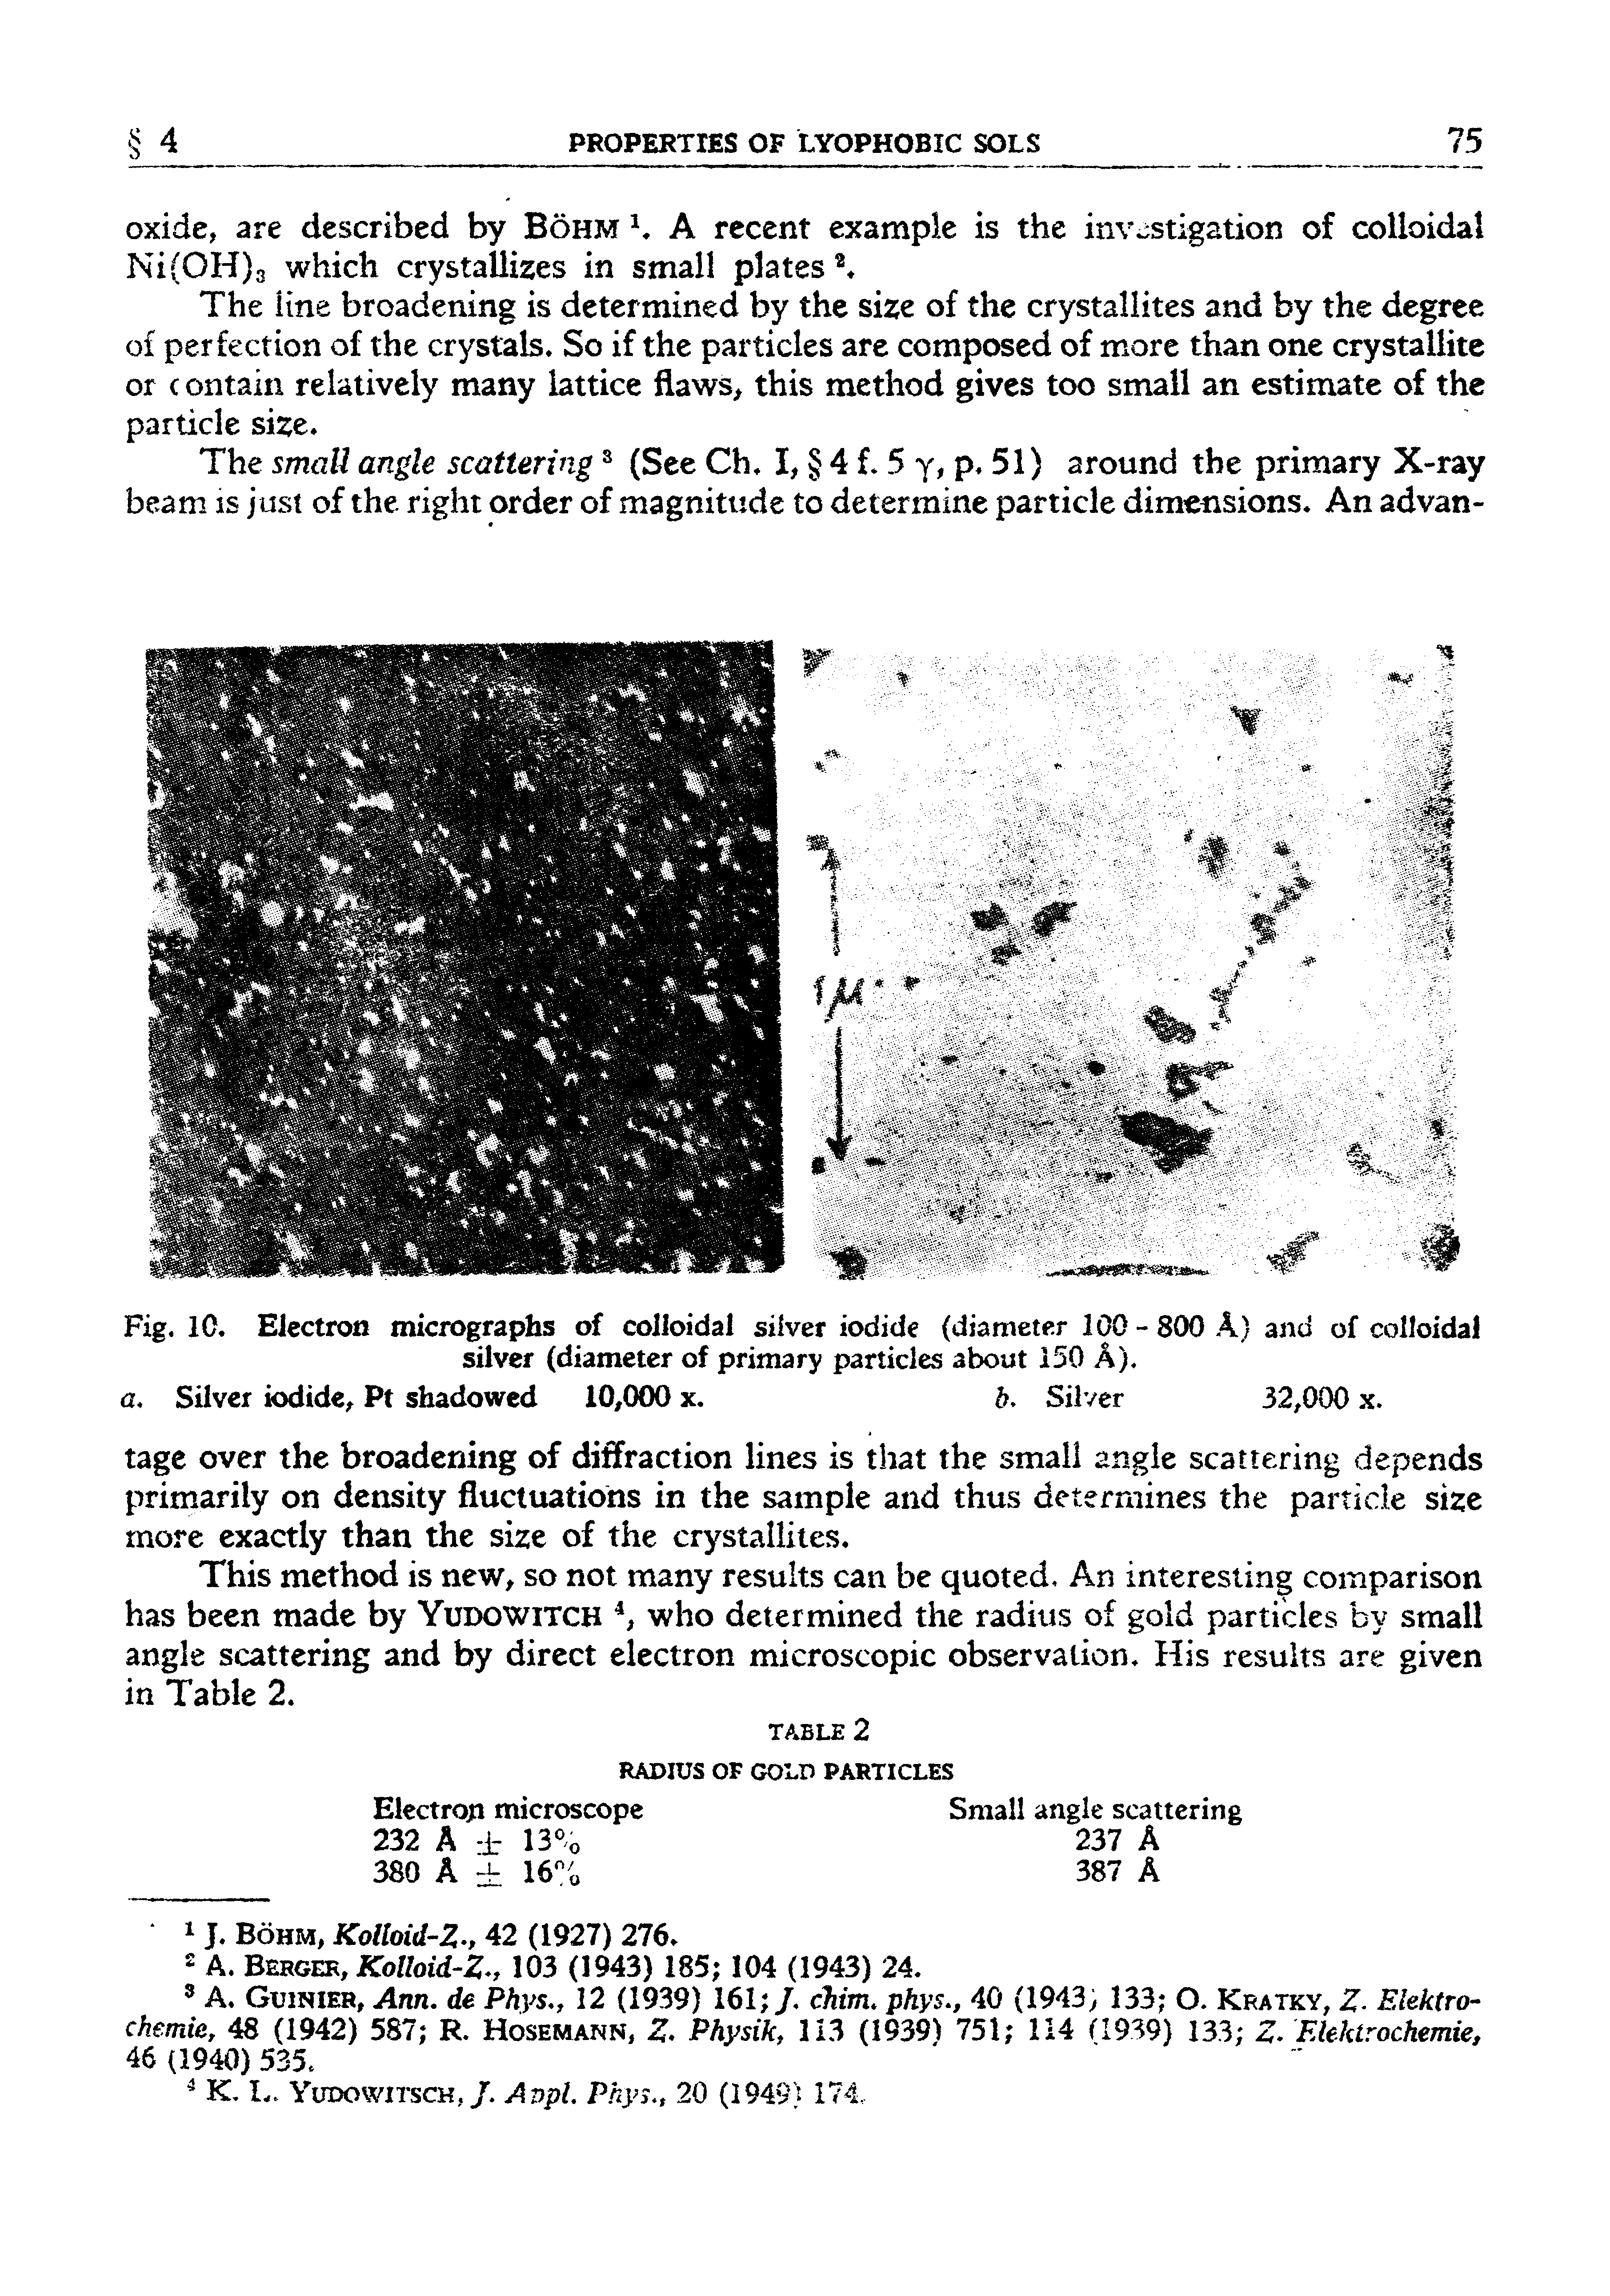 Fig. 10. Electron micrographs of colloidal silver iodide (diameter 100 - 800 A) and of colloidal silver (diameter of primary particles about 150 A), a. Silver iodide Pt shadowed 10,000 x. b. Silver 32,000 x.